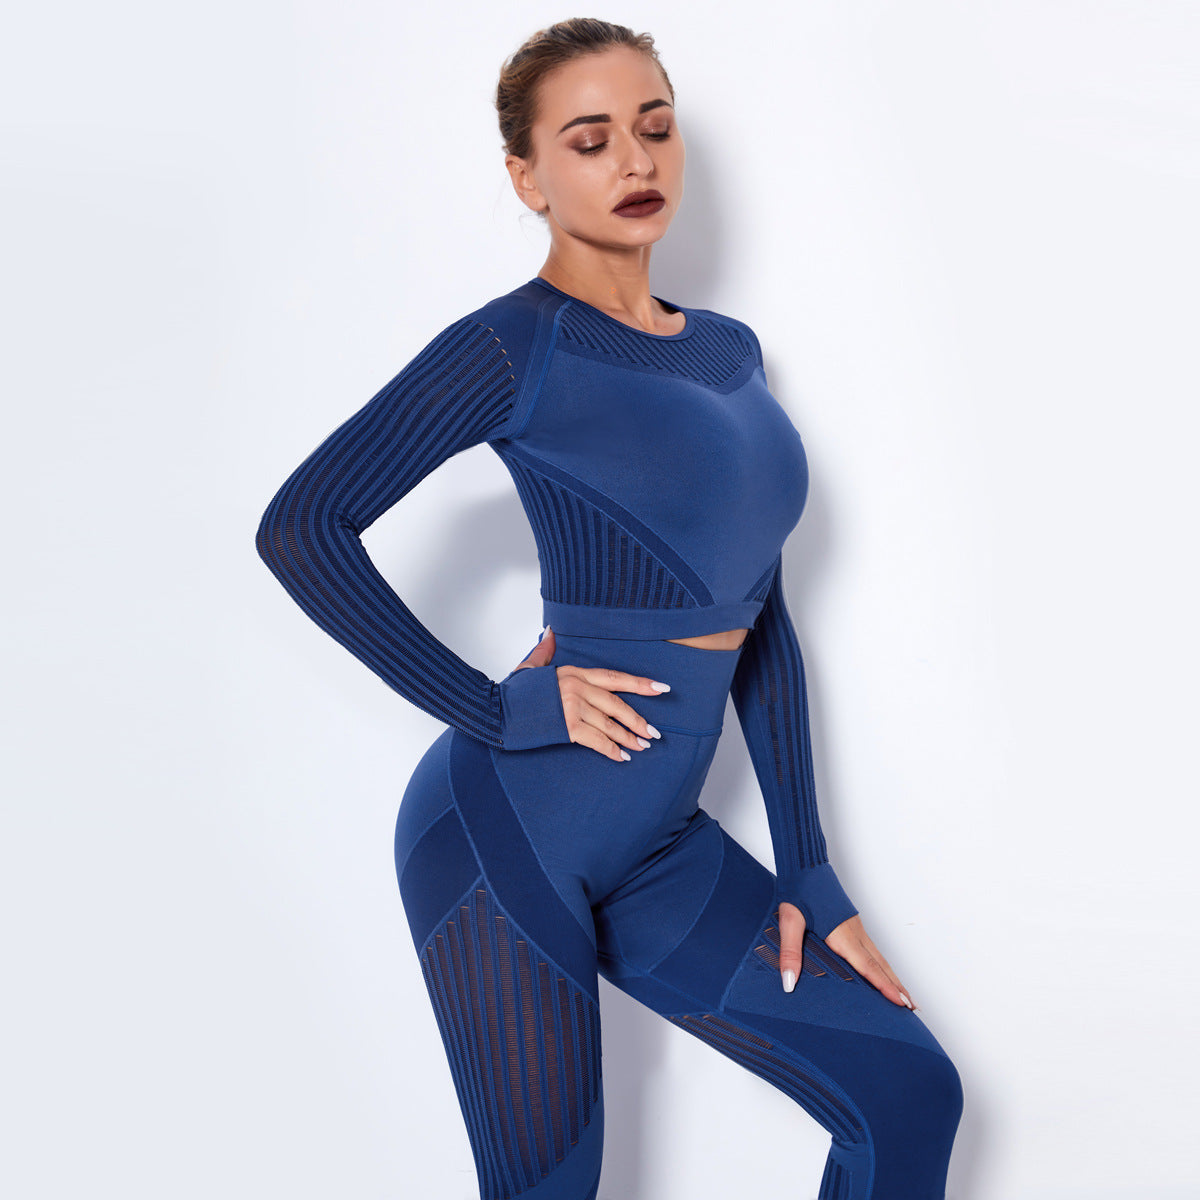 New Sports Skinny Hollow out Plastic Top Quick-Drying Running Yoga Clothes Seamless Workout Long Sleeve